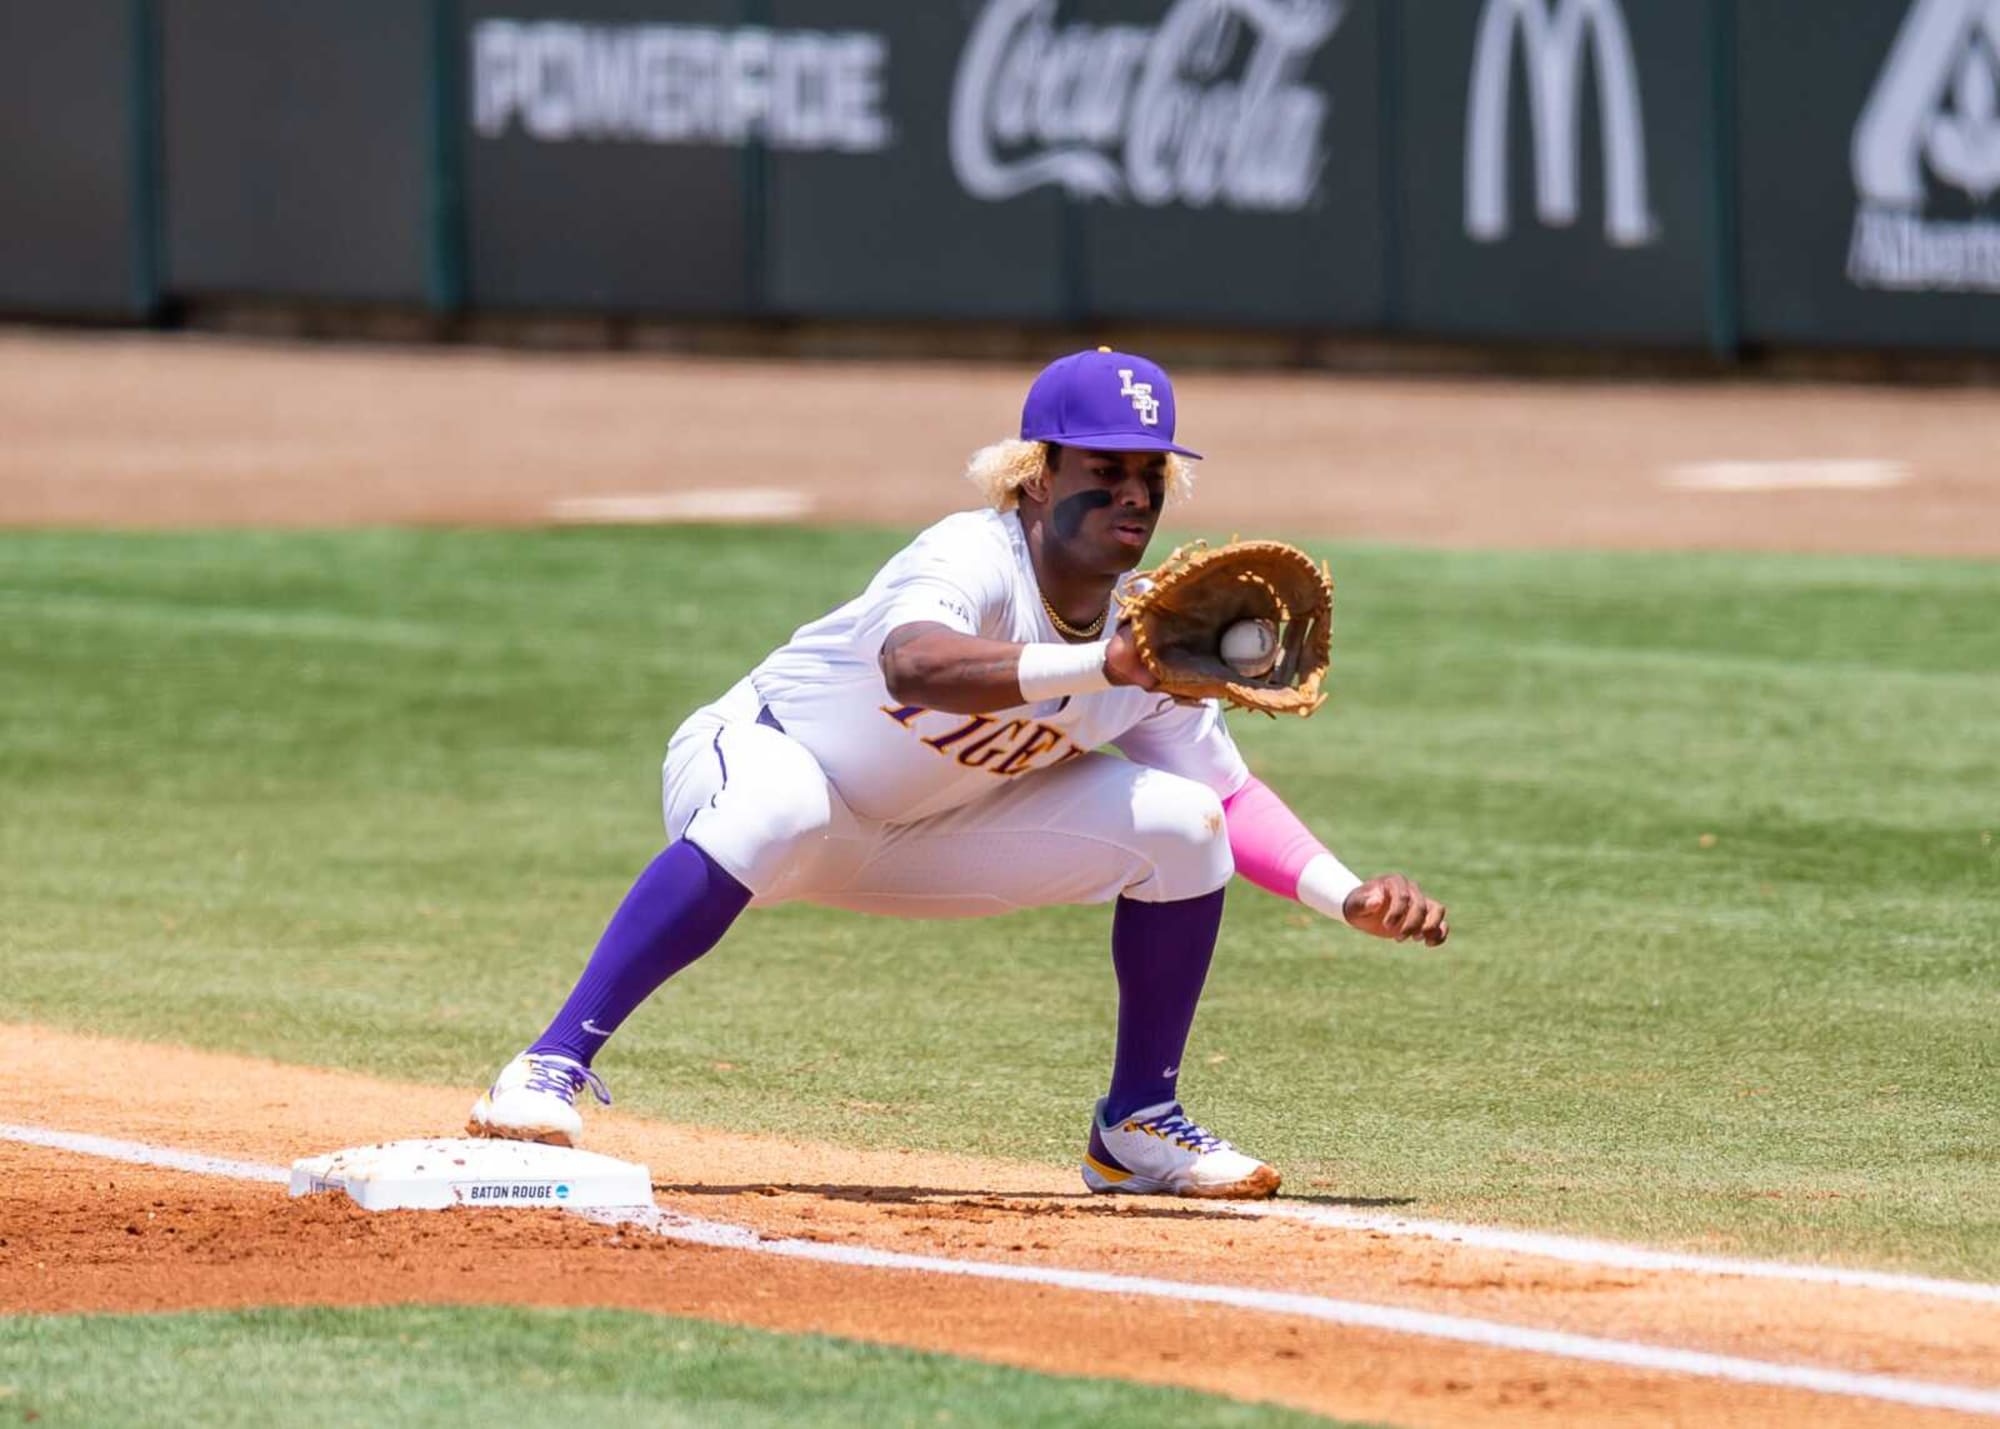 LSU Tigers dismantle Tulane in first game of Baton Rouge regional